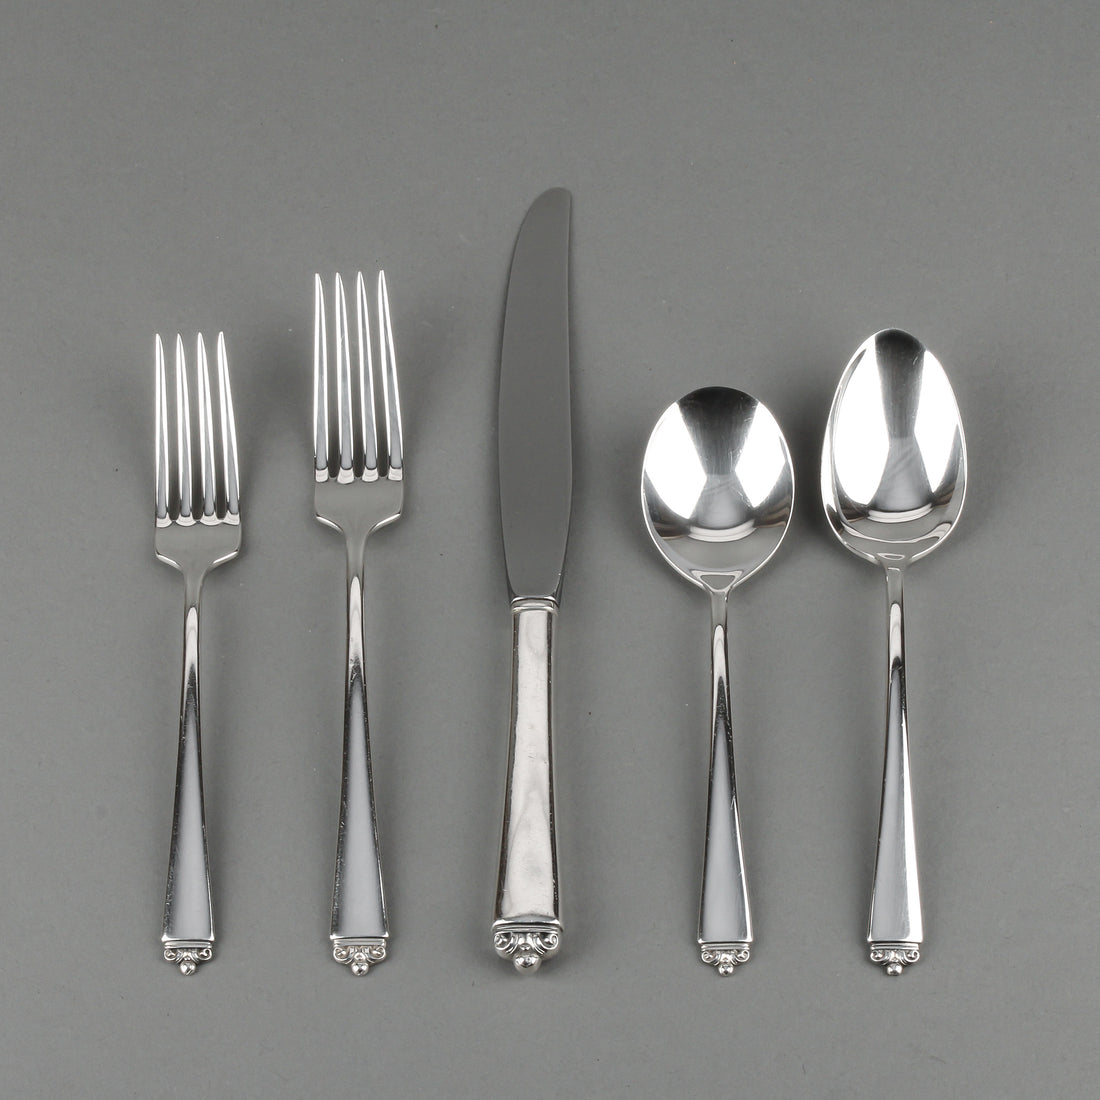 HEIRLOOM STERLING Reigning Beauty Sterling Silver Flatware - 20 Pieces